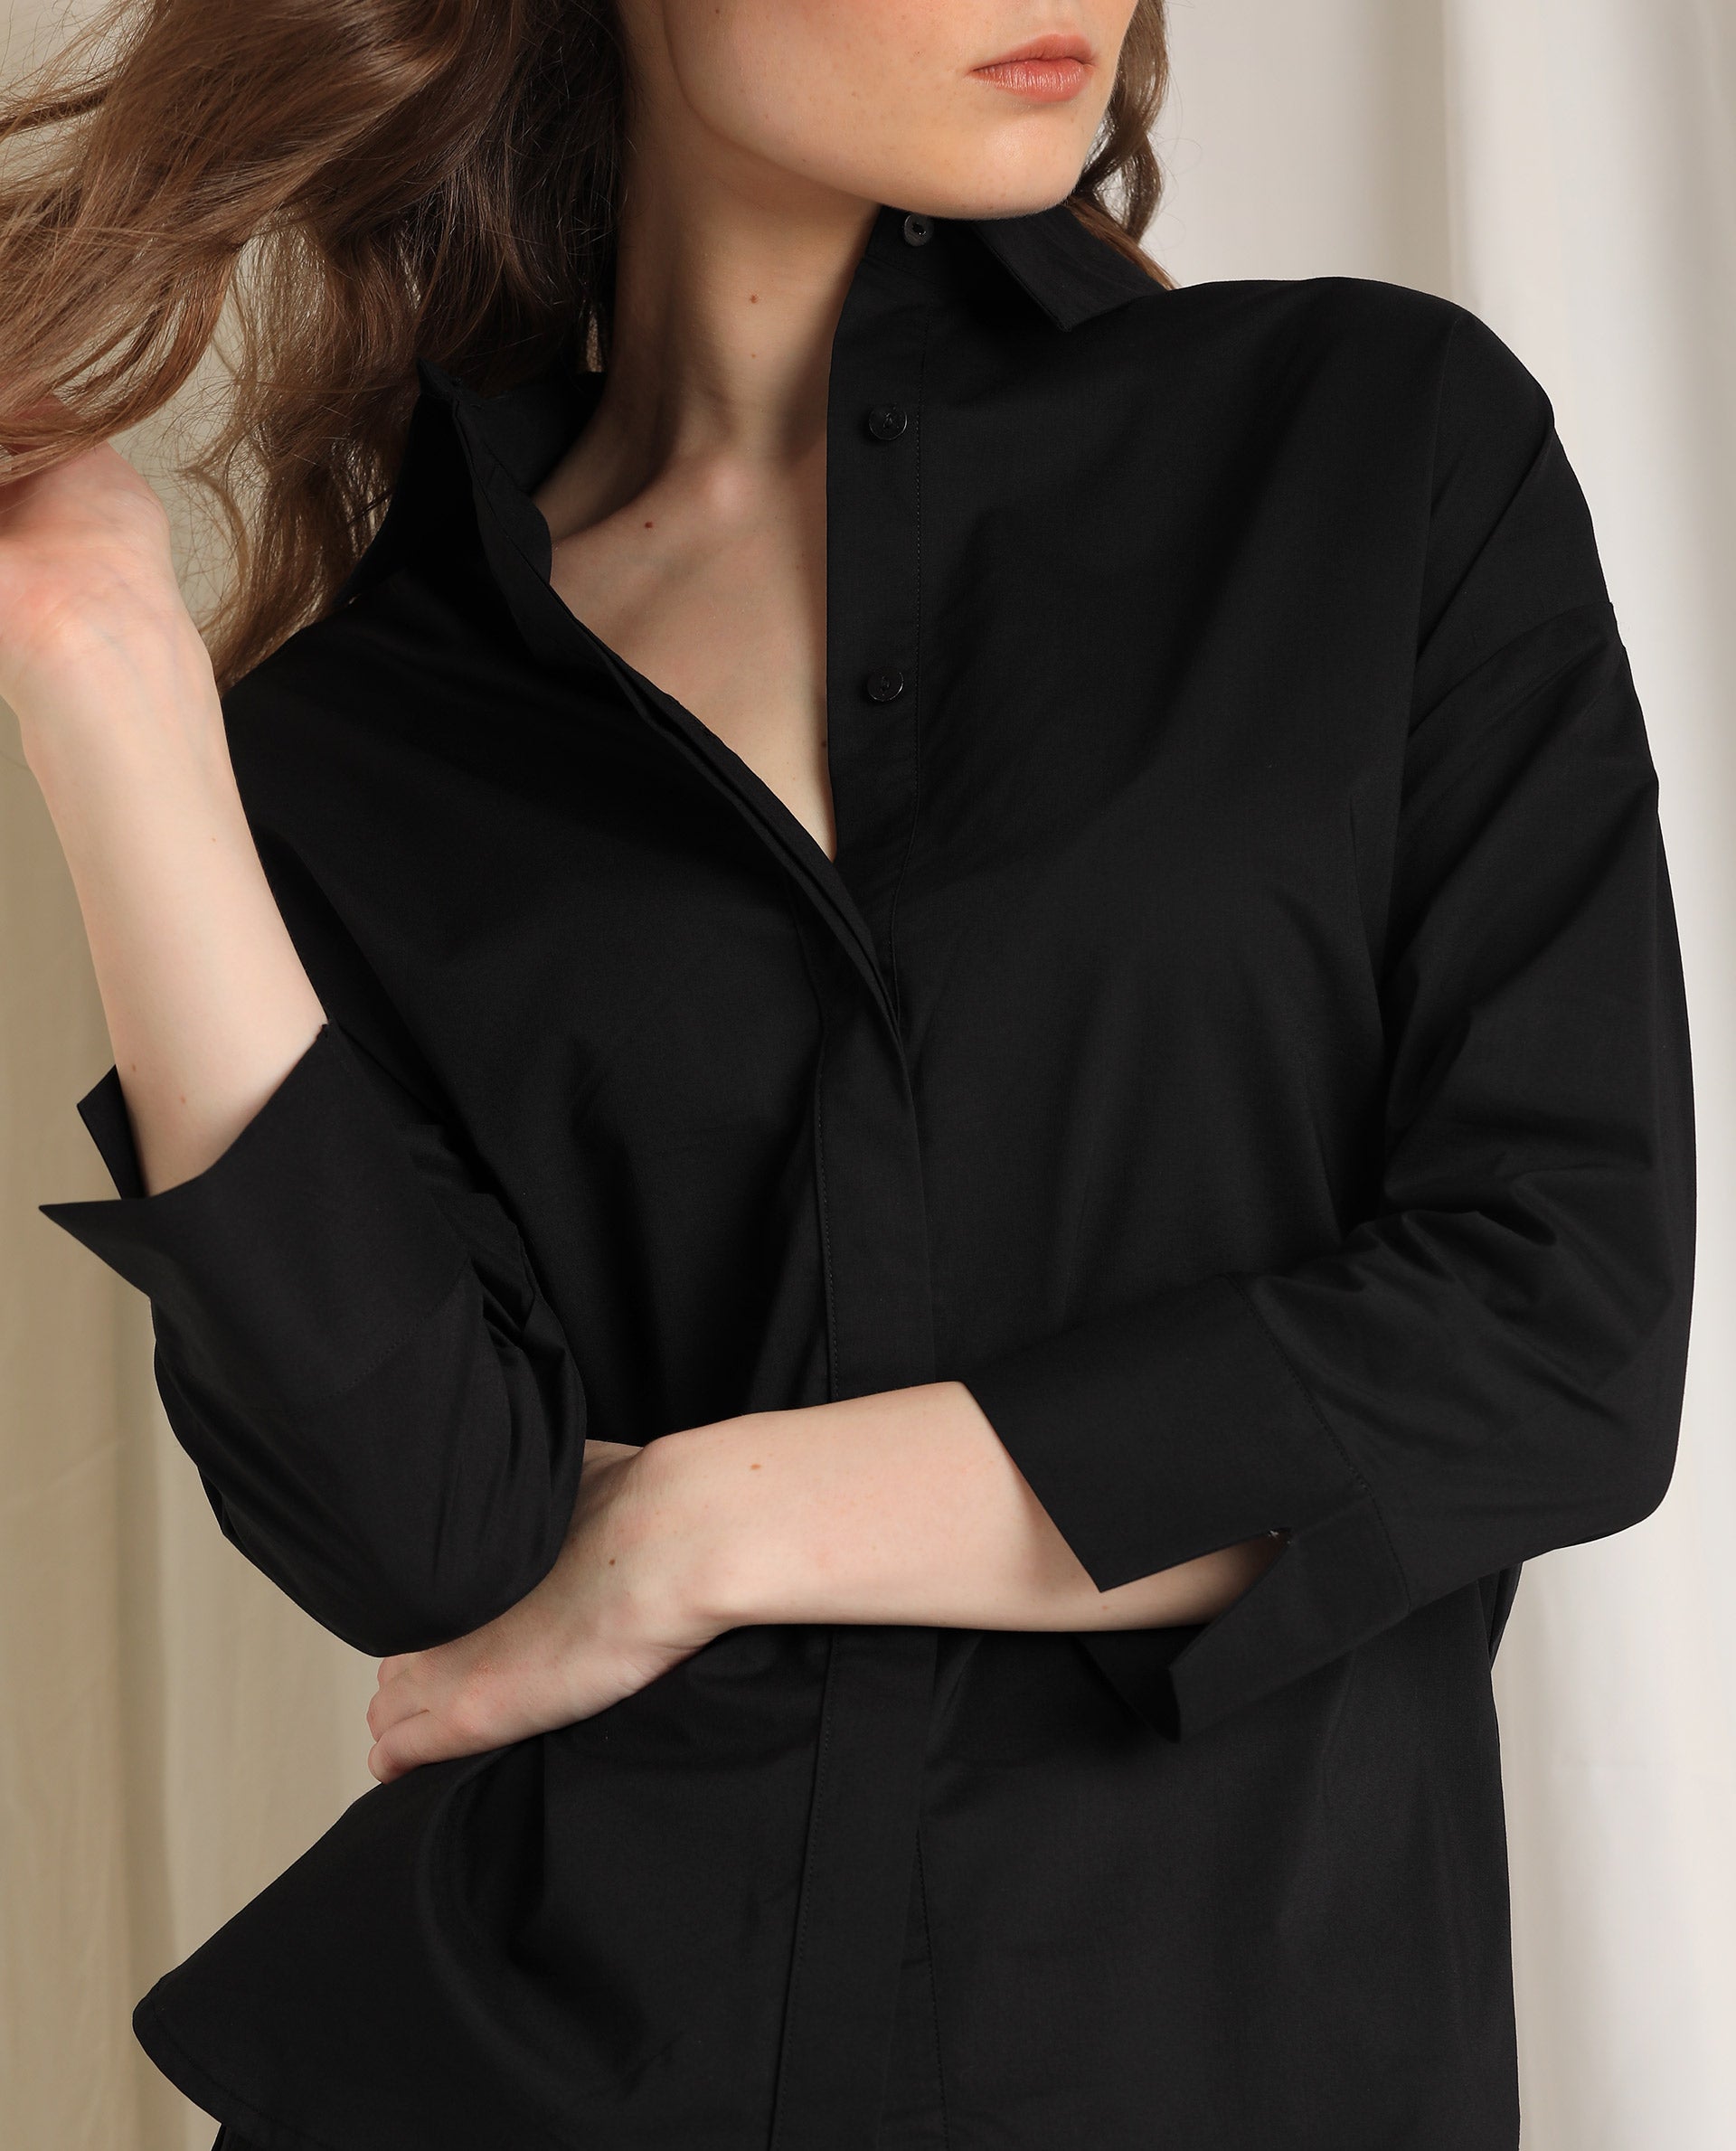 WOMENS ELEVEN BLACK TOP Polyester FABRIC Regular FIT 3/4 Sleeve Collared Neck